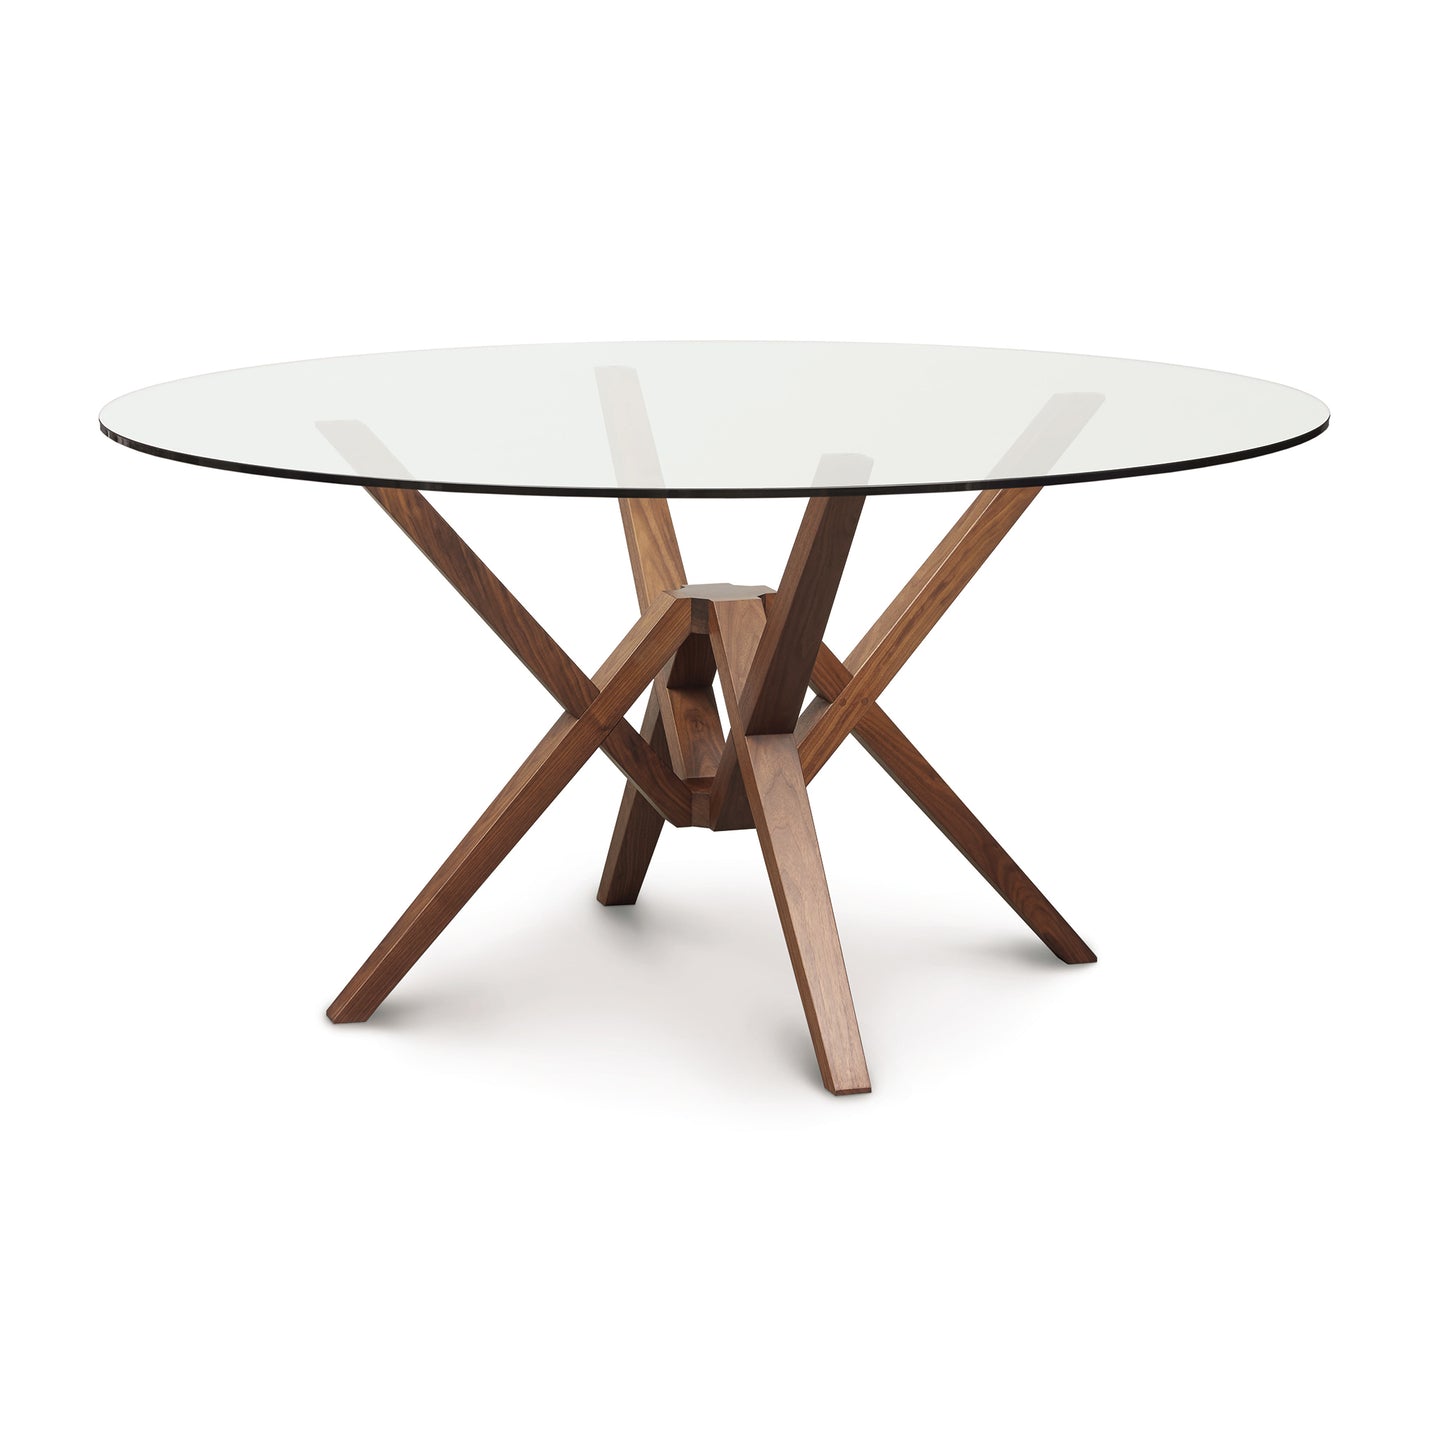 The Copeland Furniture Exeter Round Glass Top Table features innovative engineering and isometric design, boasting a glass top and wooden legs for a modern dining experience.